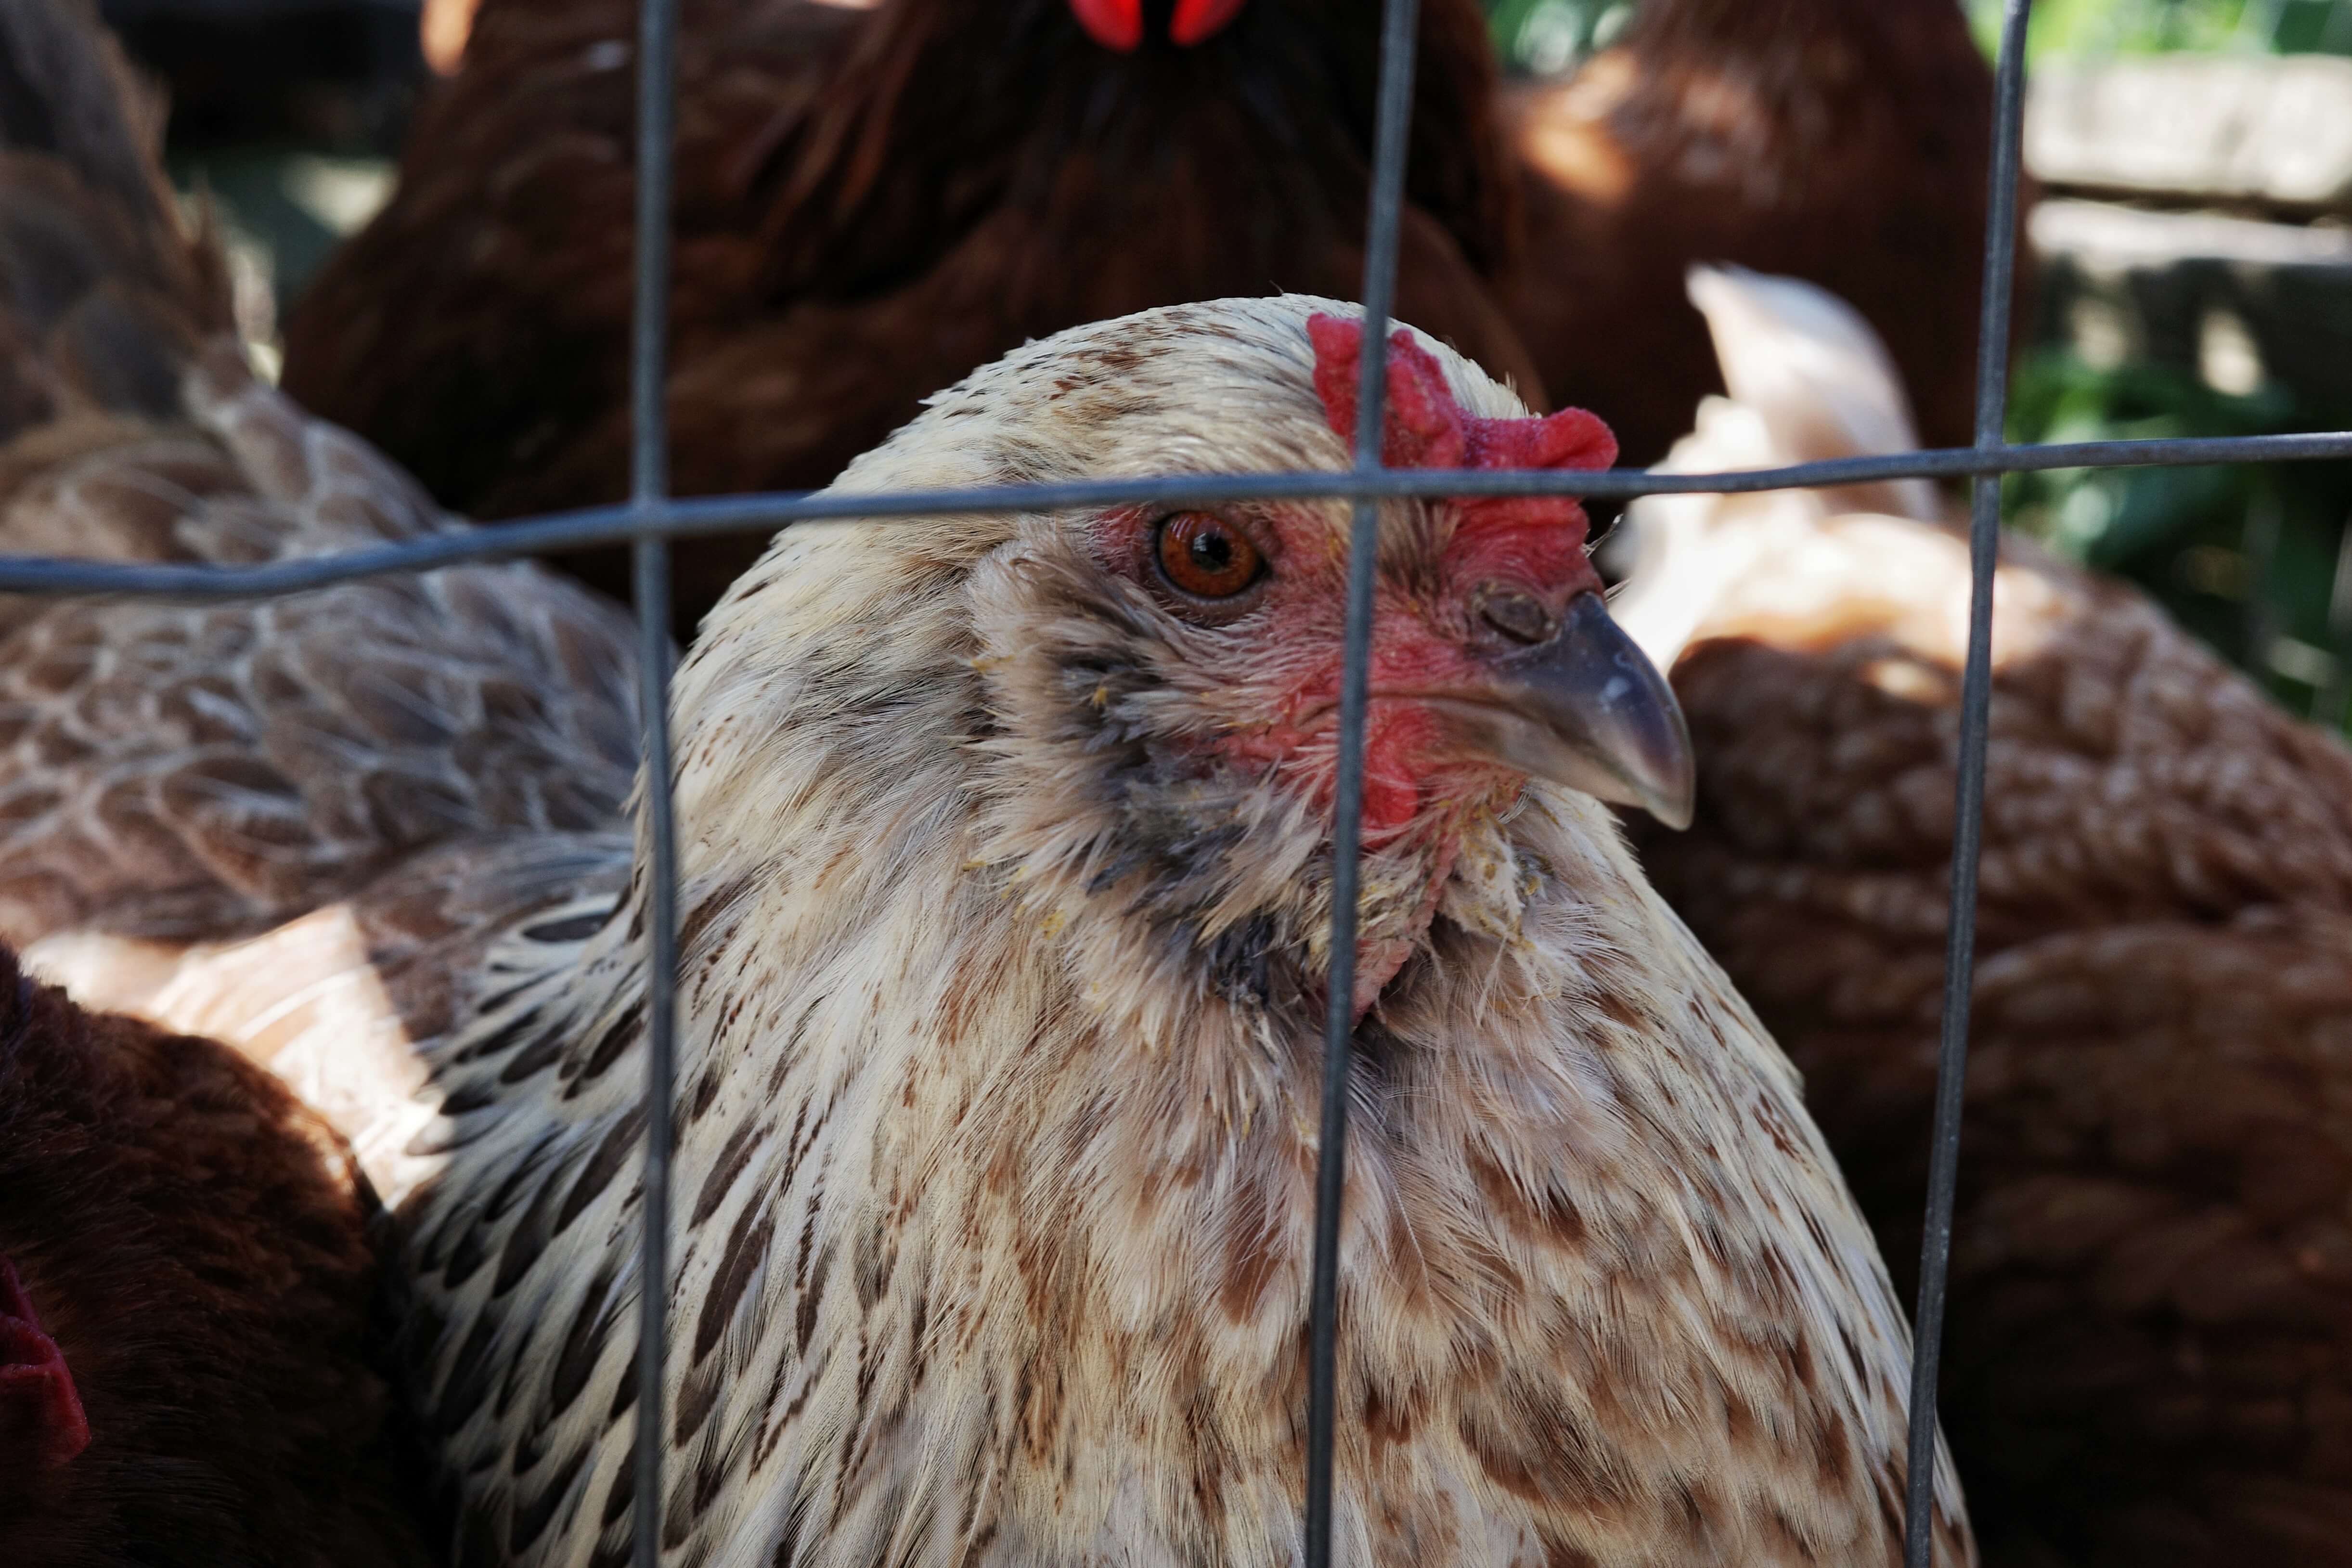 close up shot of a chicken in a fenced area with other chickens nearby